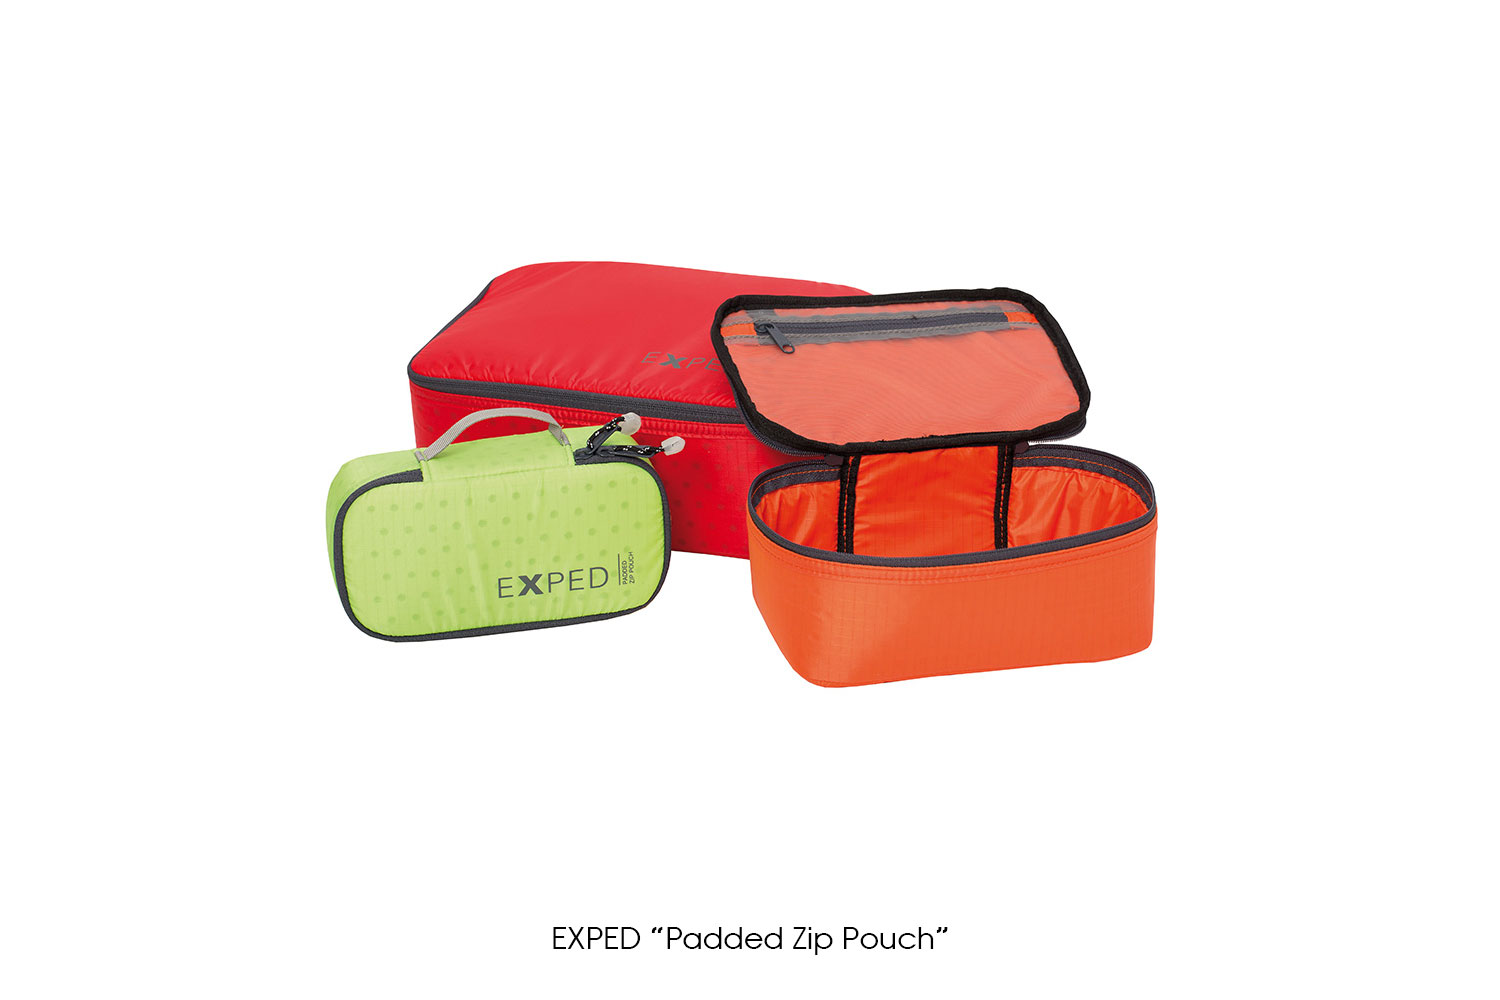 EXPED "Padded Zip Pouch"